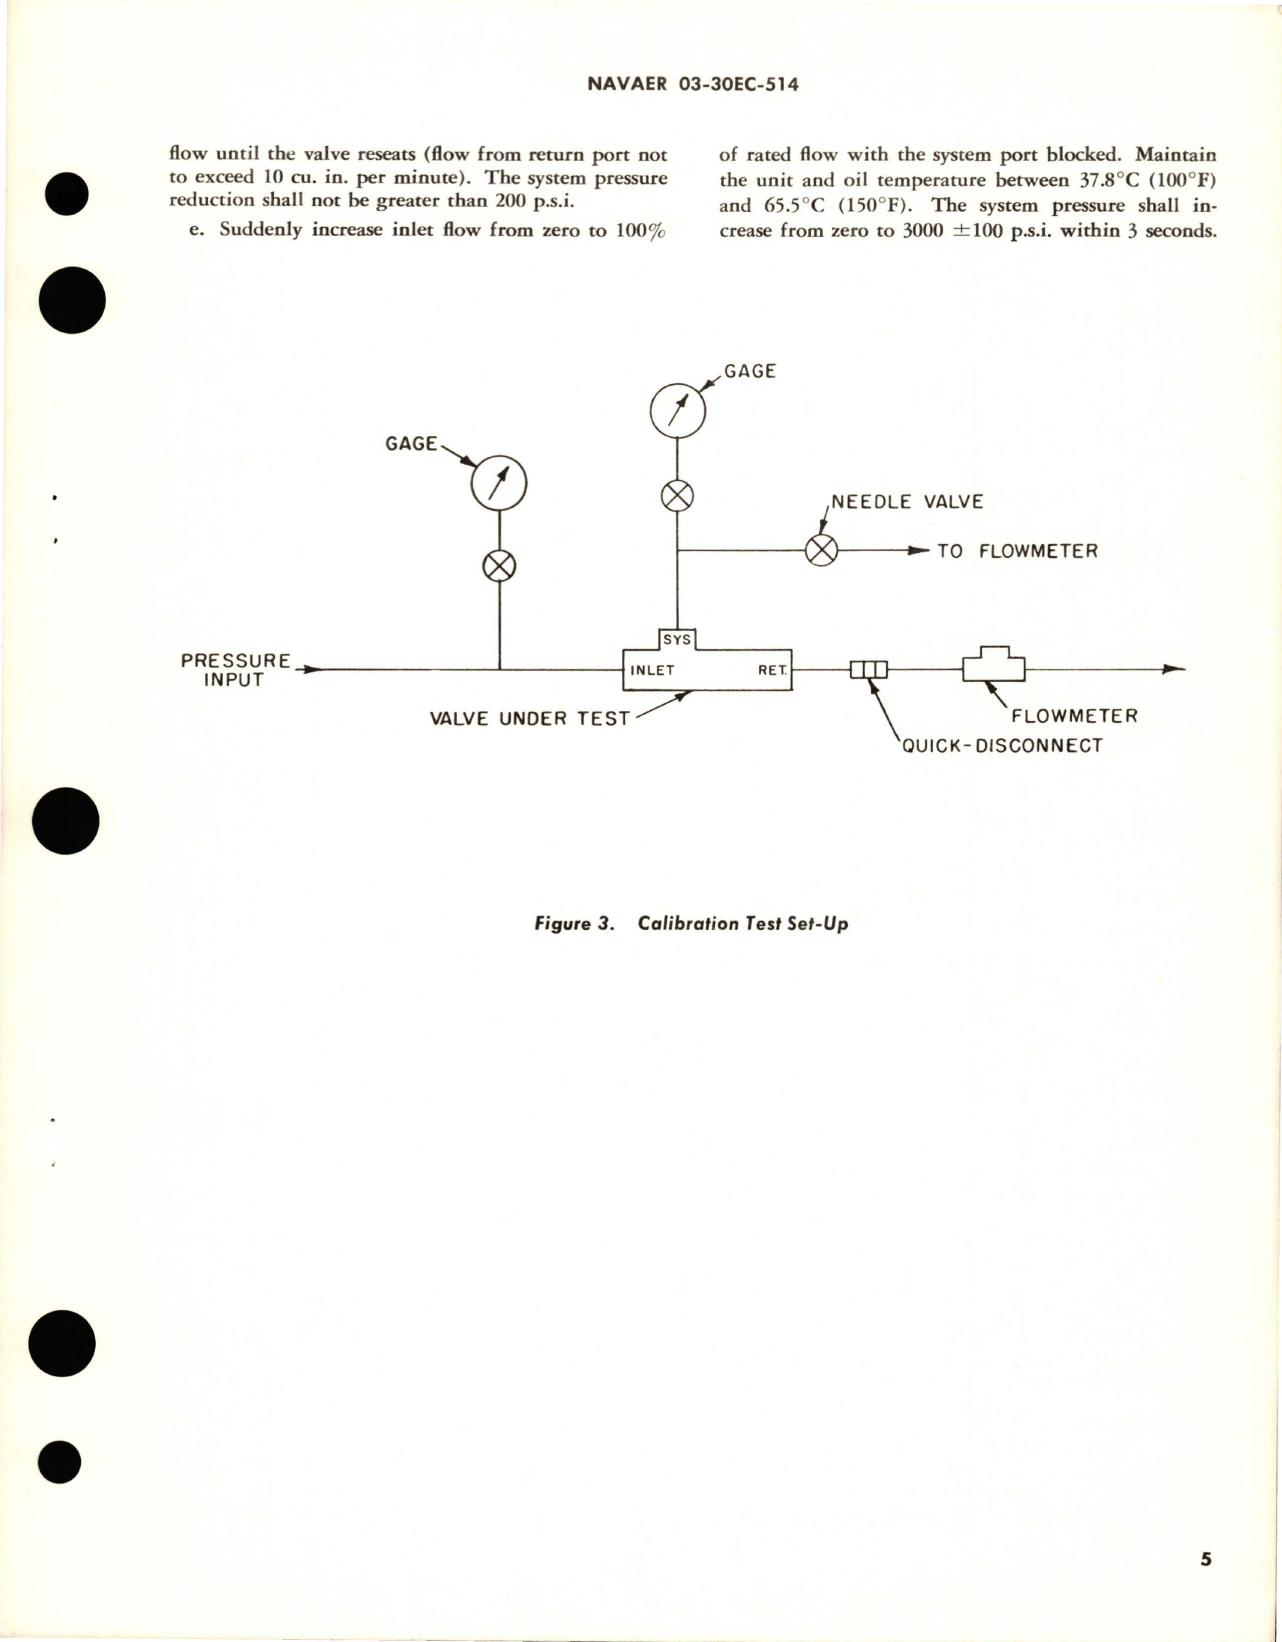 Sample page 5 from AirCorps Library document: Overhaul Instructions with Parts Breakdown for Hydraulic Flow Sensitive Pressure Regulator Valve - AFS-6-01